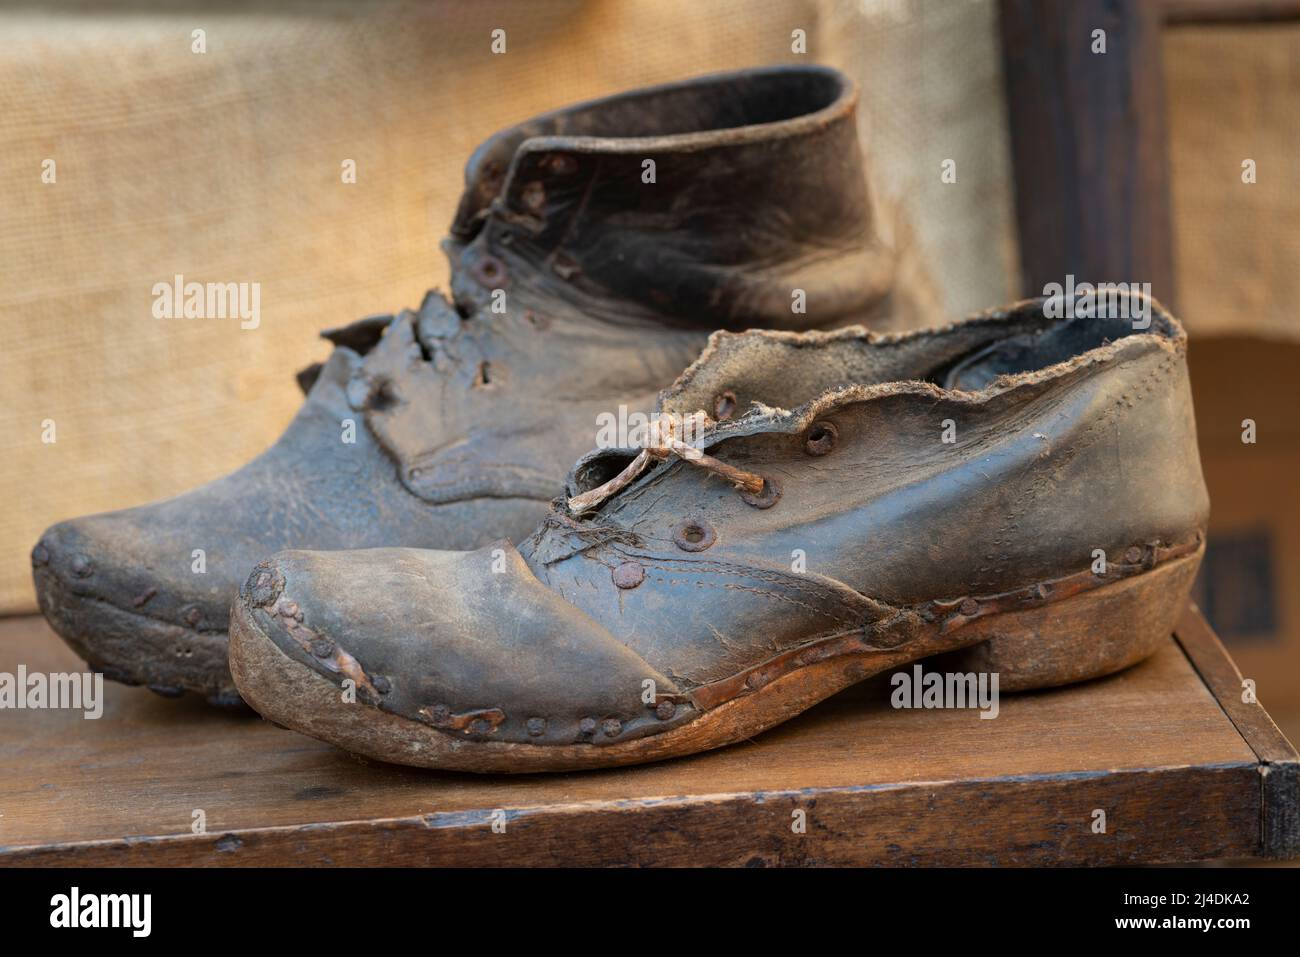 Italy, Lombardy, Flea Market, Old Broken Leather Shoes Stock Photo